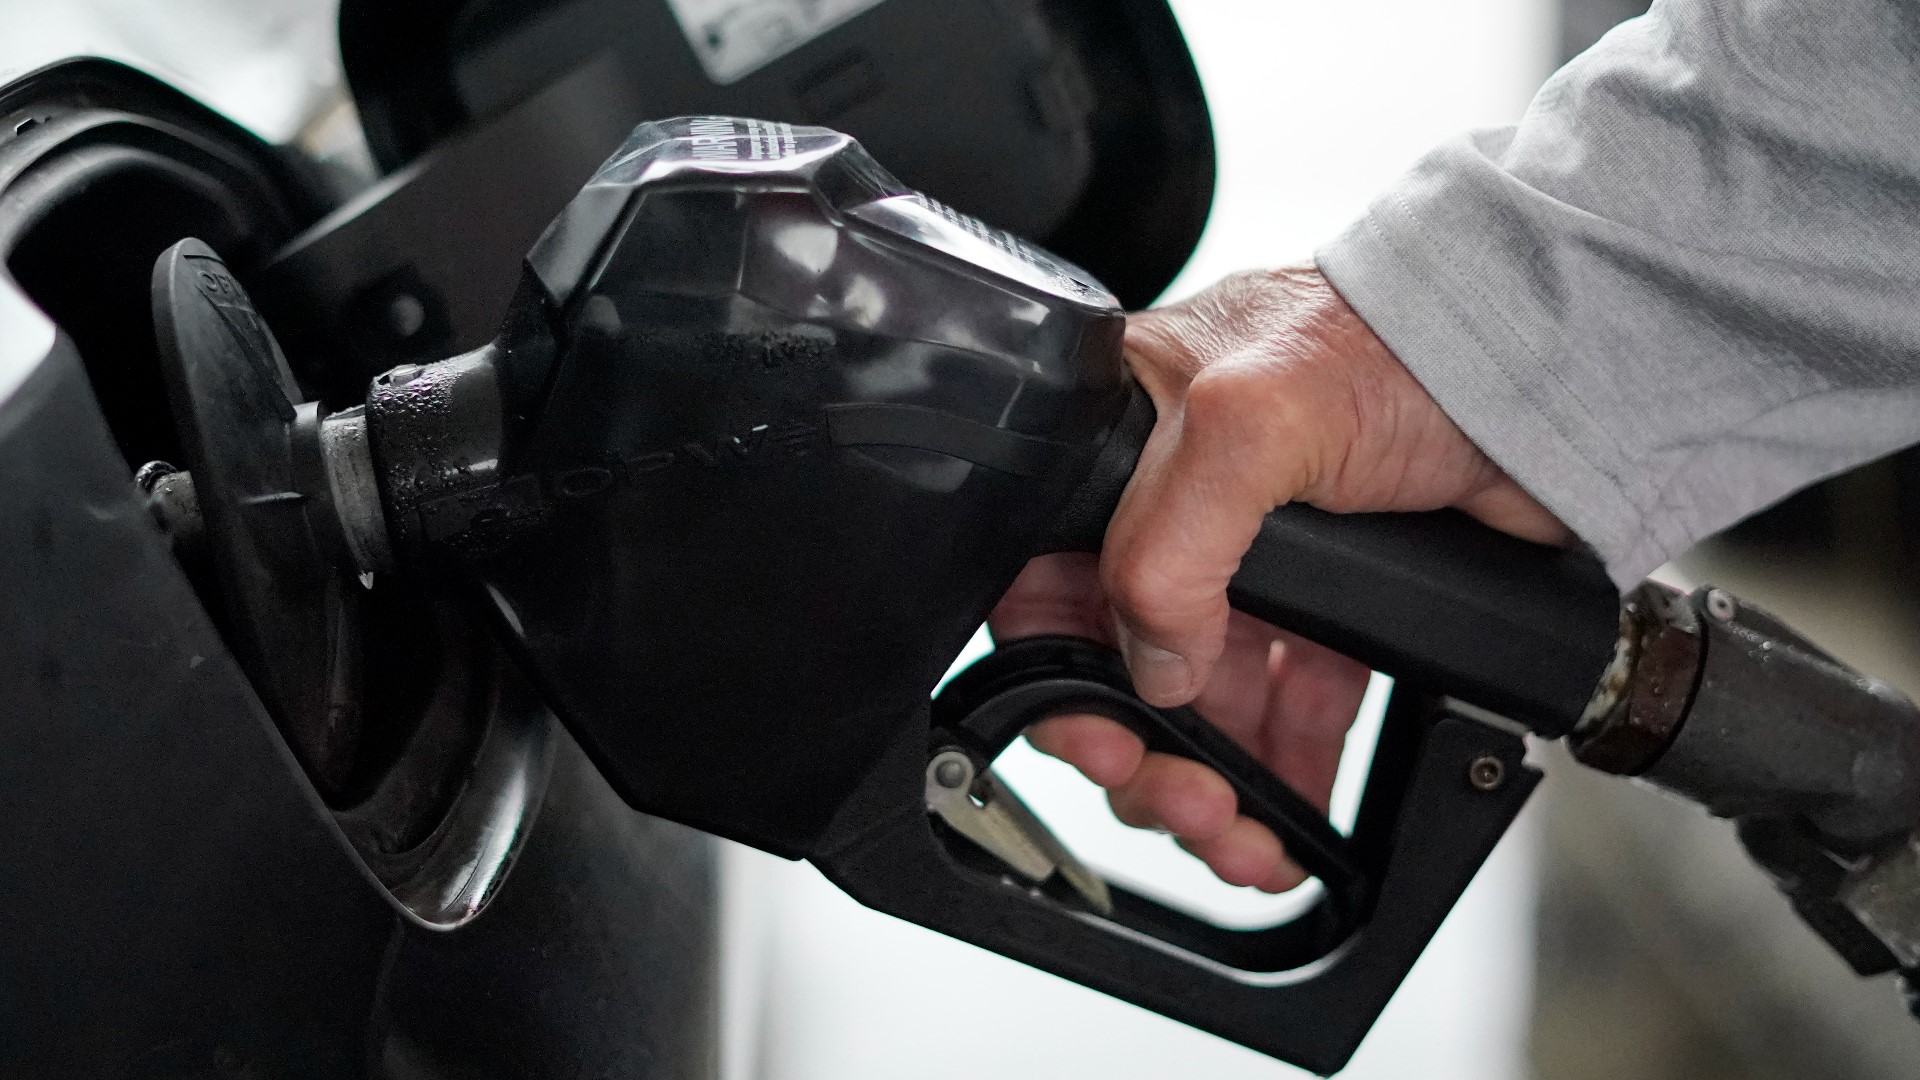 If approved by Congress, the suspension would reduce the cost of gasoline 18 cents a gallon.